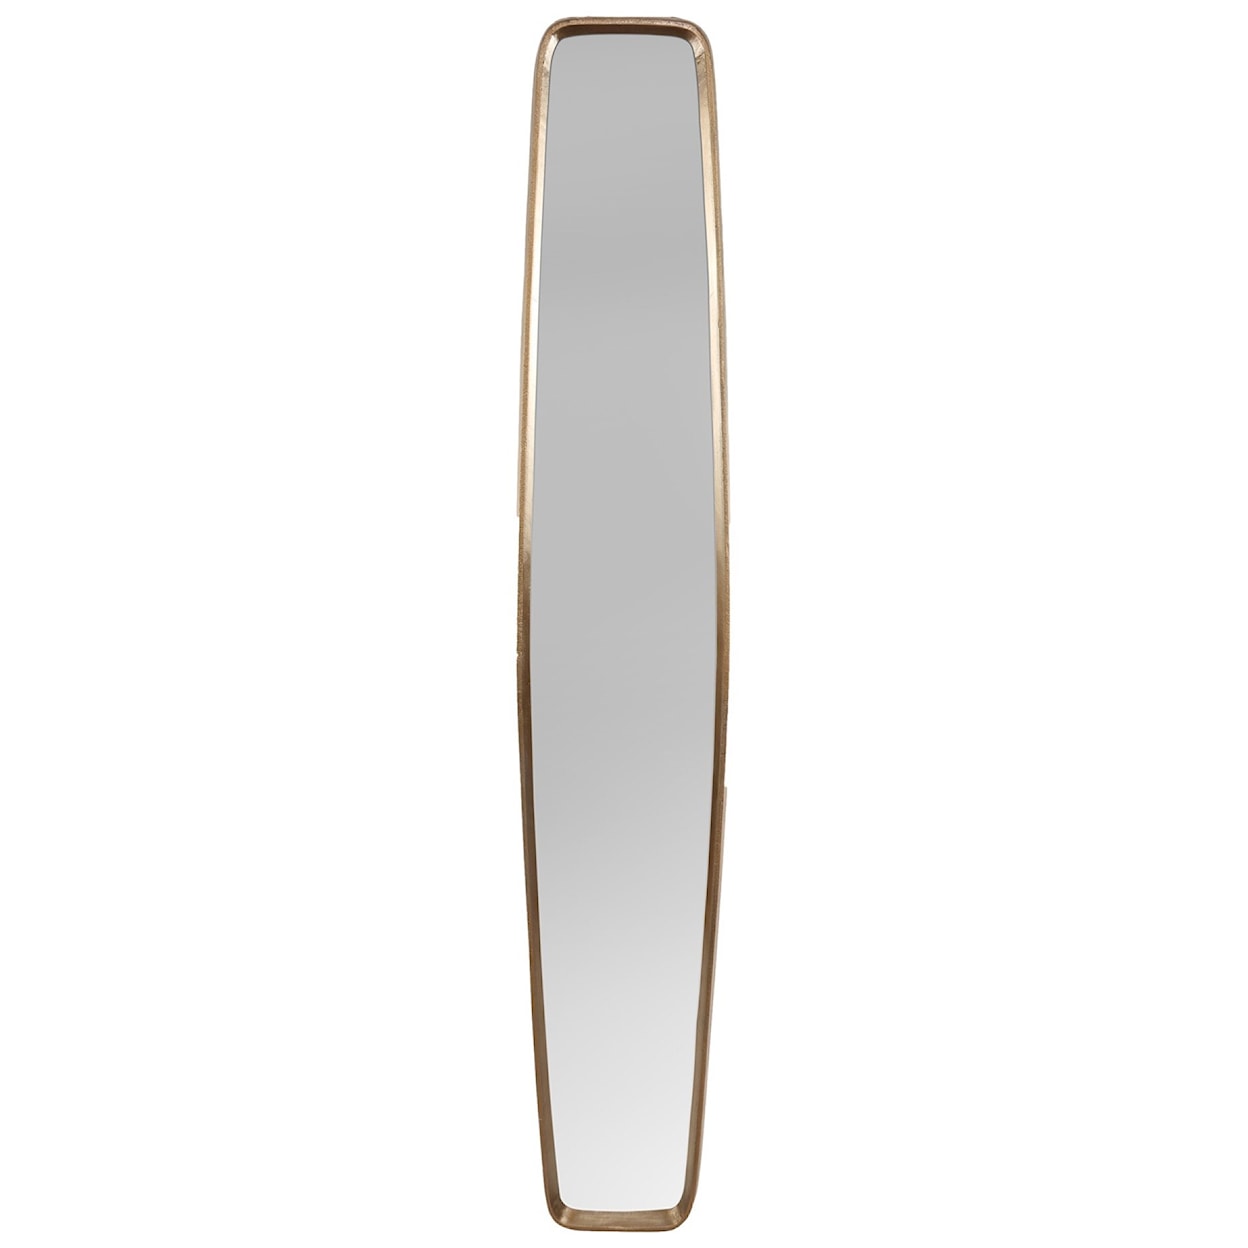 Moe's Home Collection Mirrors and Screens Fitzroy Mirror with Antique Brass Finish